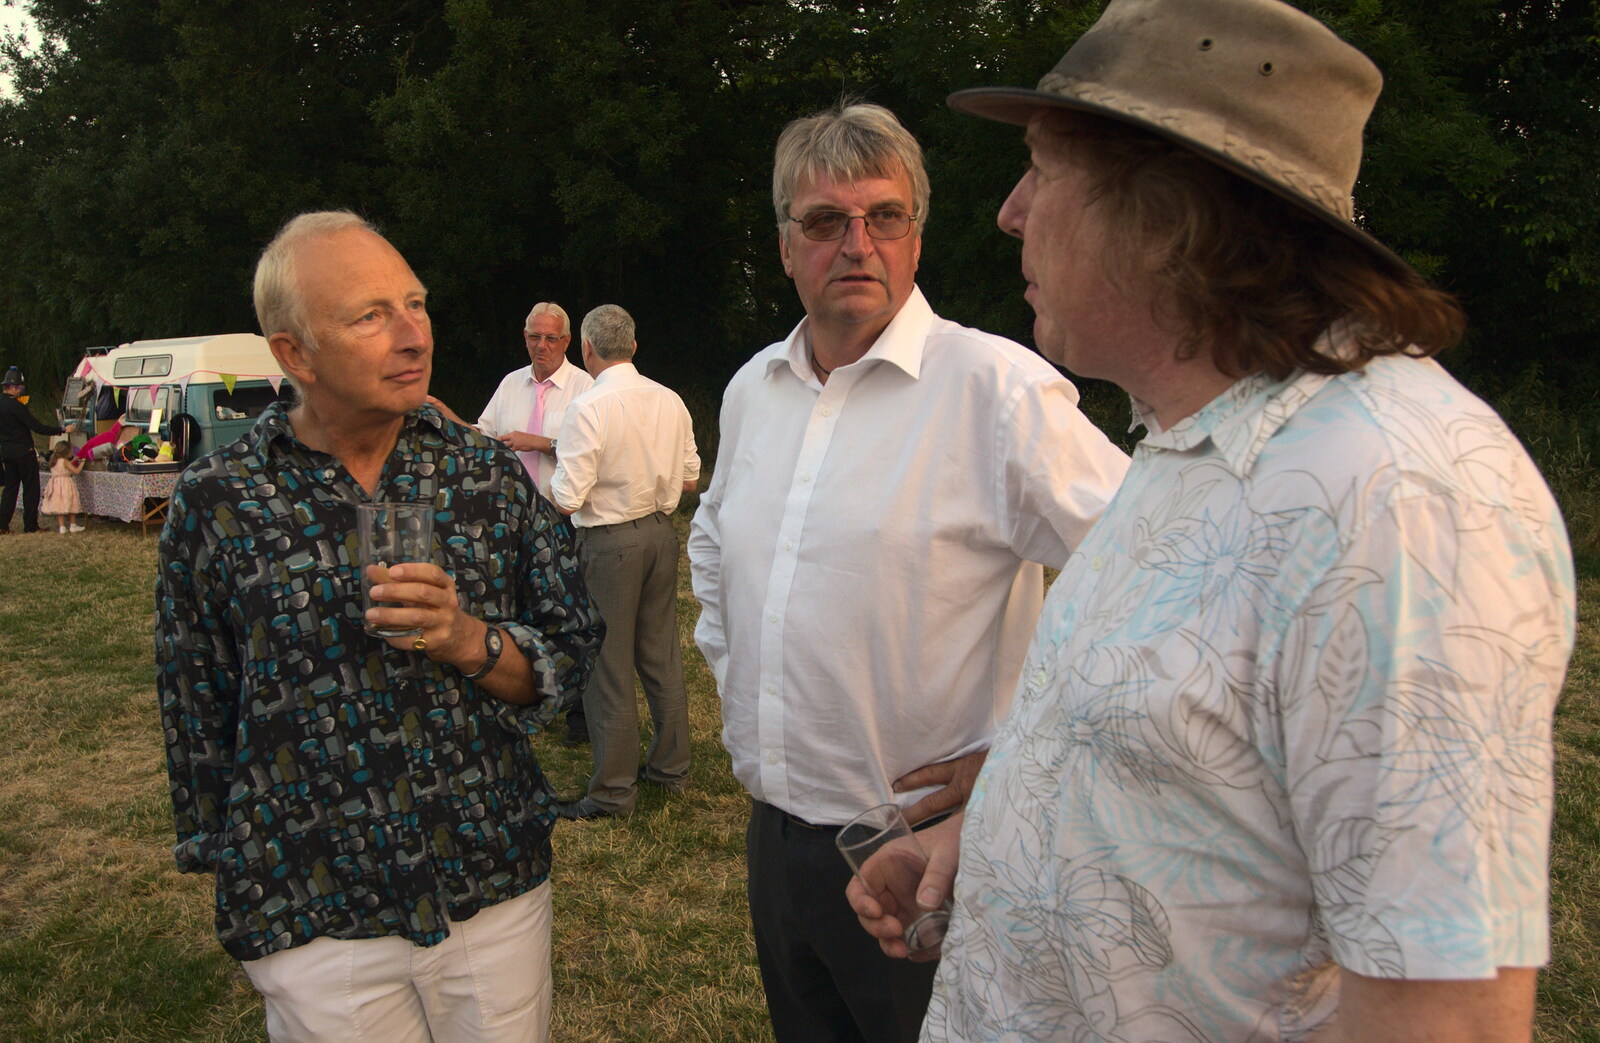 Henry, Martin and Max talk about stuff from The BBs Play Steph's Wedding, Burston, Norfolk - 13th July 2013